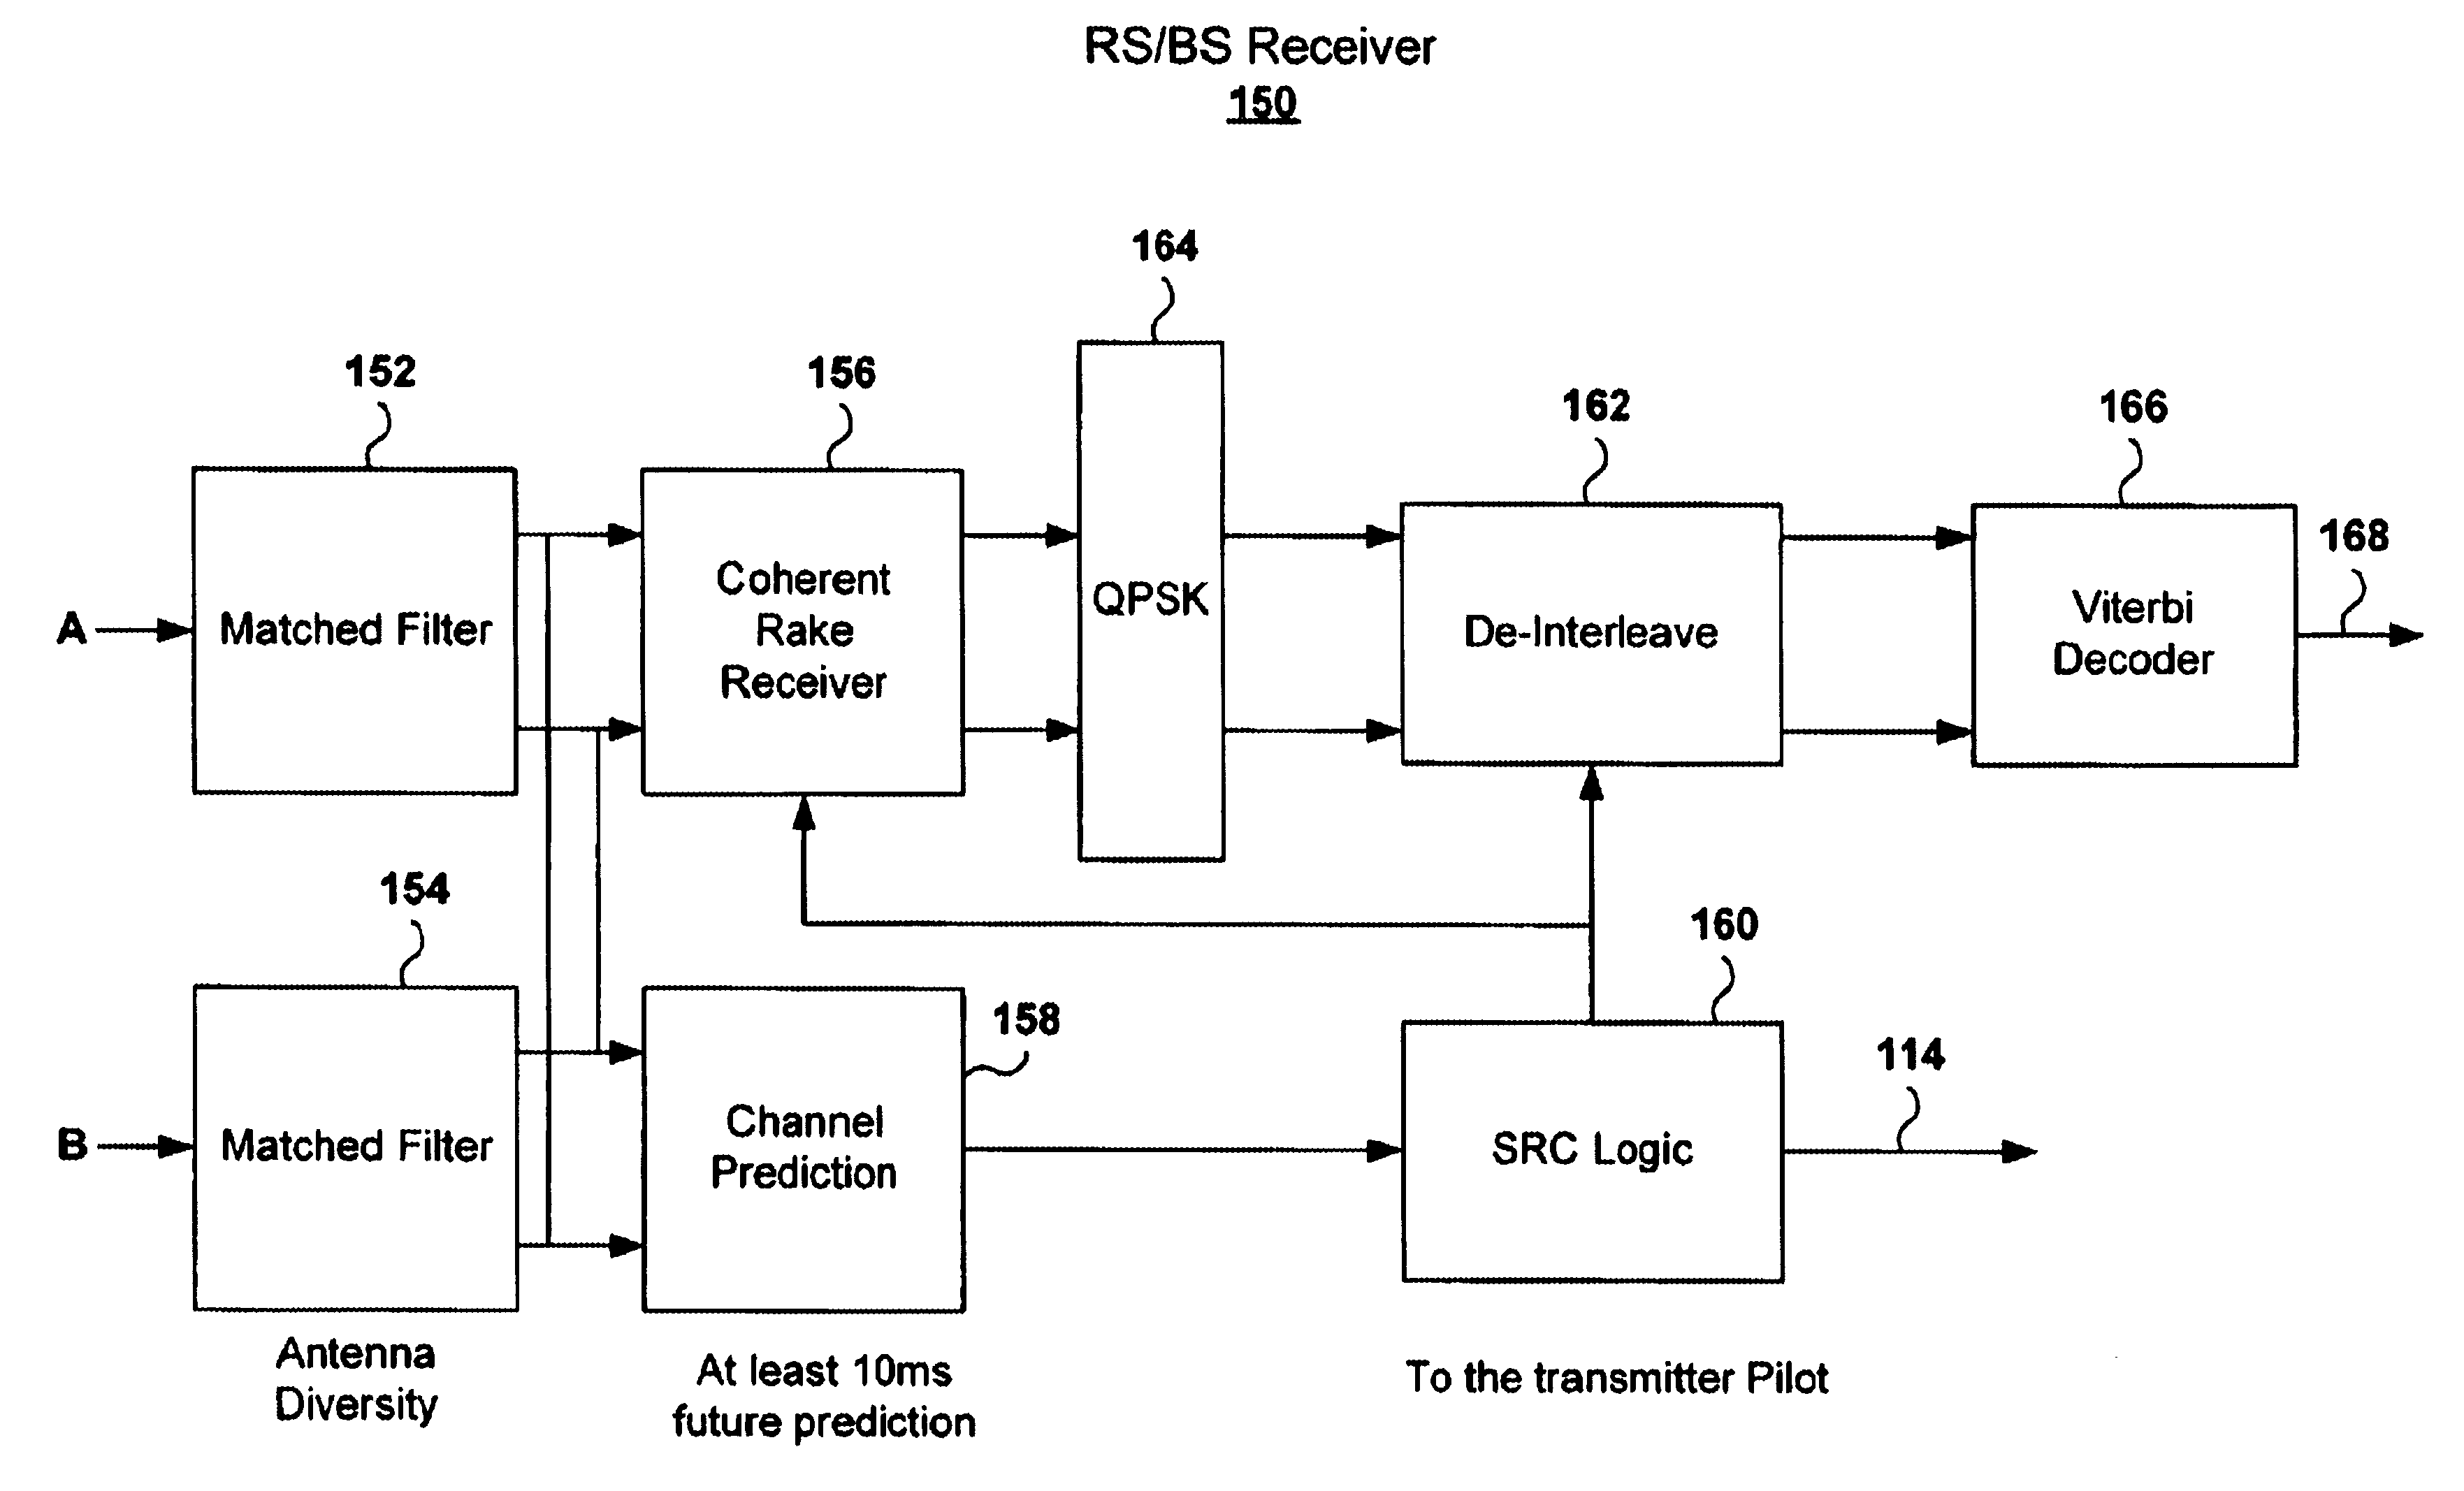 Adaptive power control based on a rake receiver configuration in wideband CDMA cellular systems (WCDMA) and methods of operation